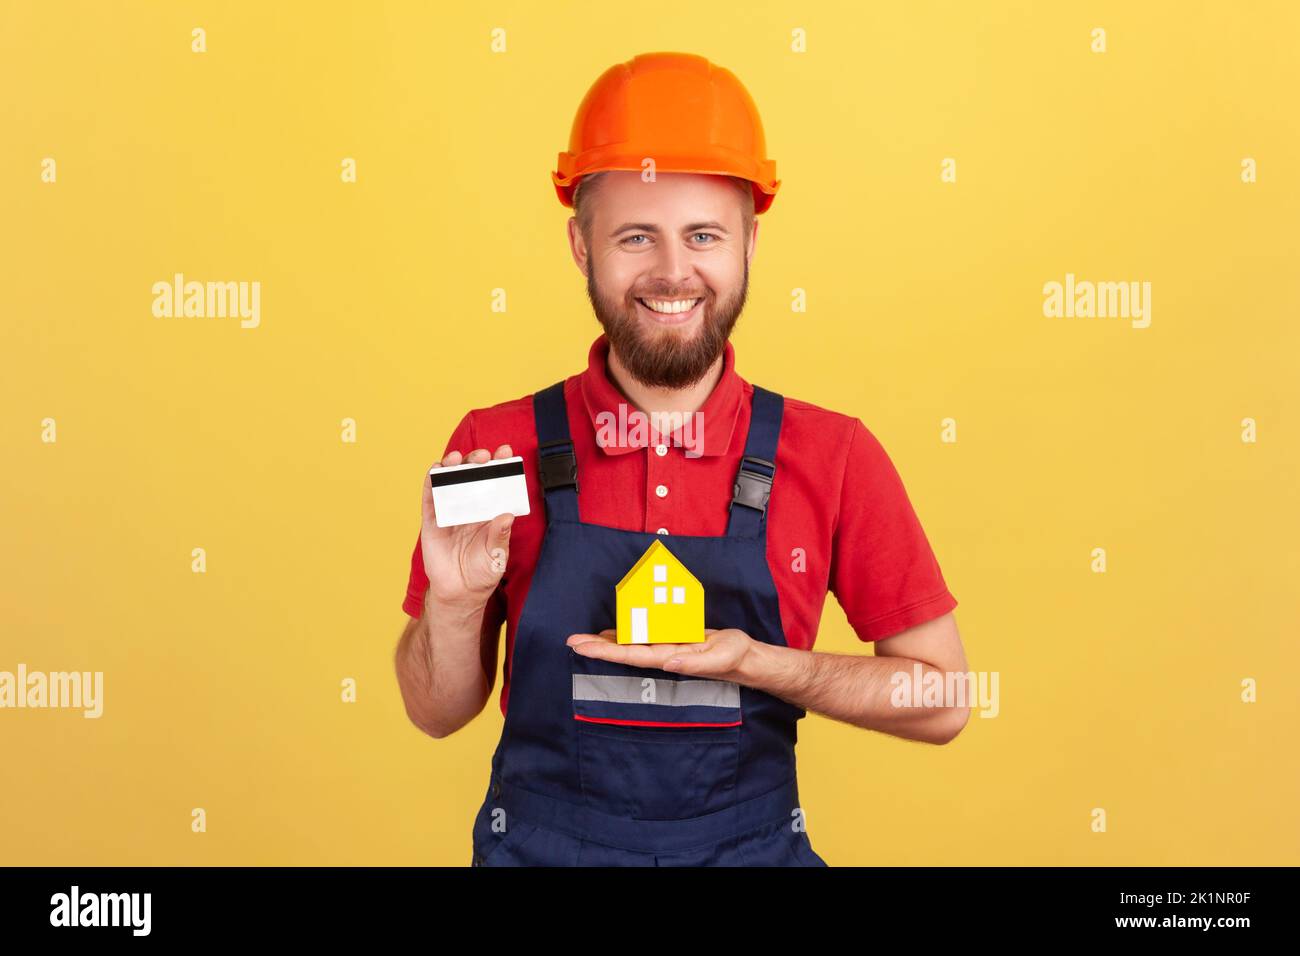 Portrait of happy builder man wearing blue uniform and protective helmet showing credit card and paper house, looking at camera with smile. Indoor studio shot isolated on yellow background. Stock Photo